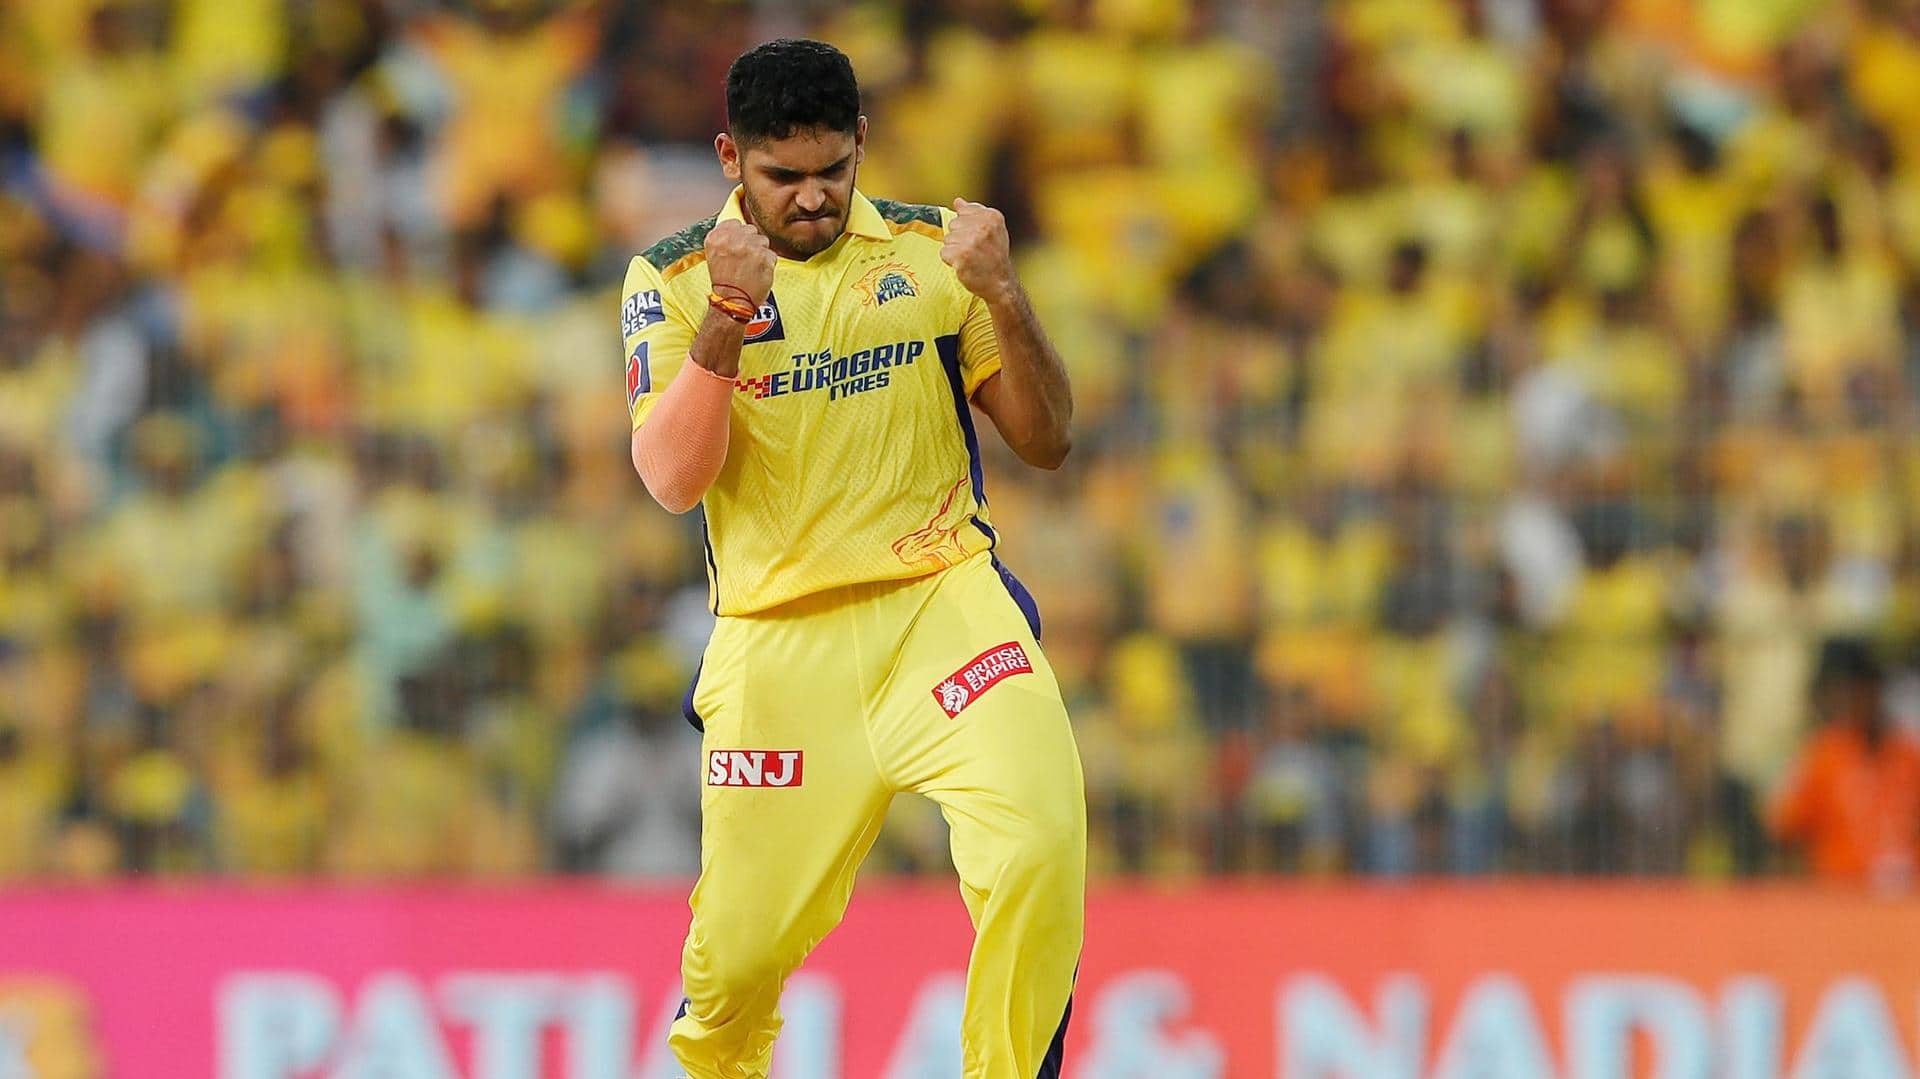 Tushar Deshpande races to 17 scalps in IPL 2023: Stats